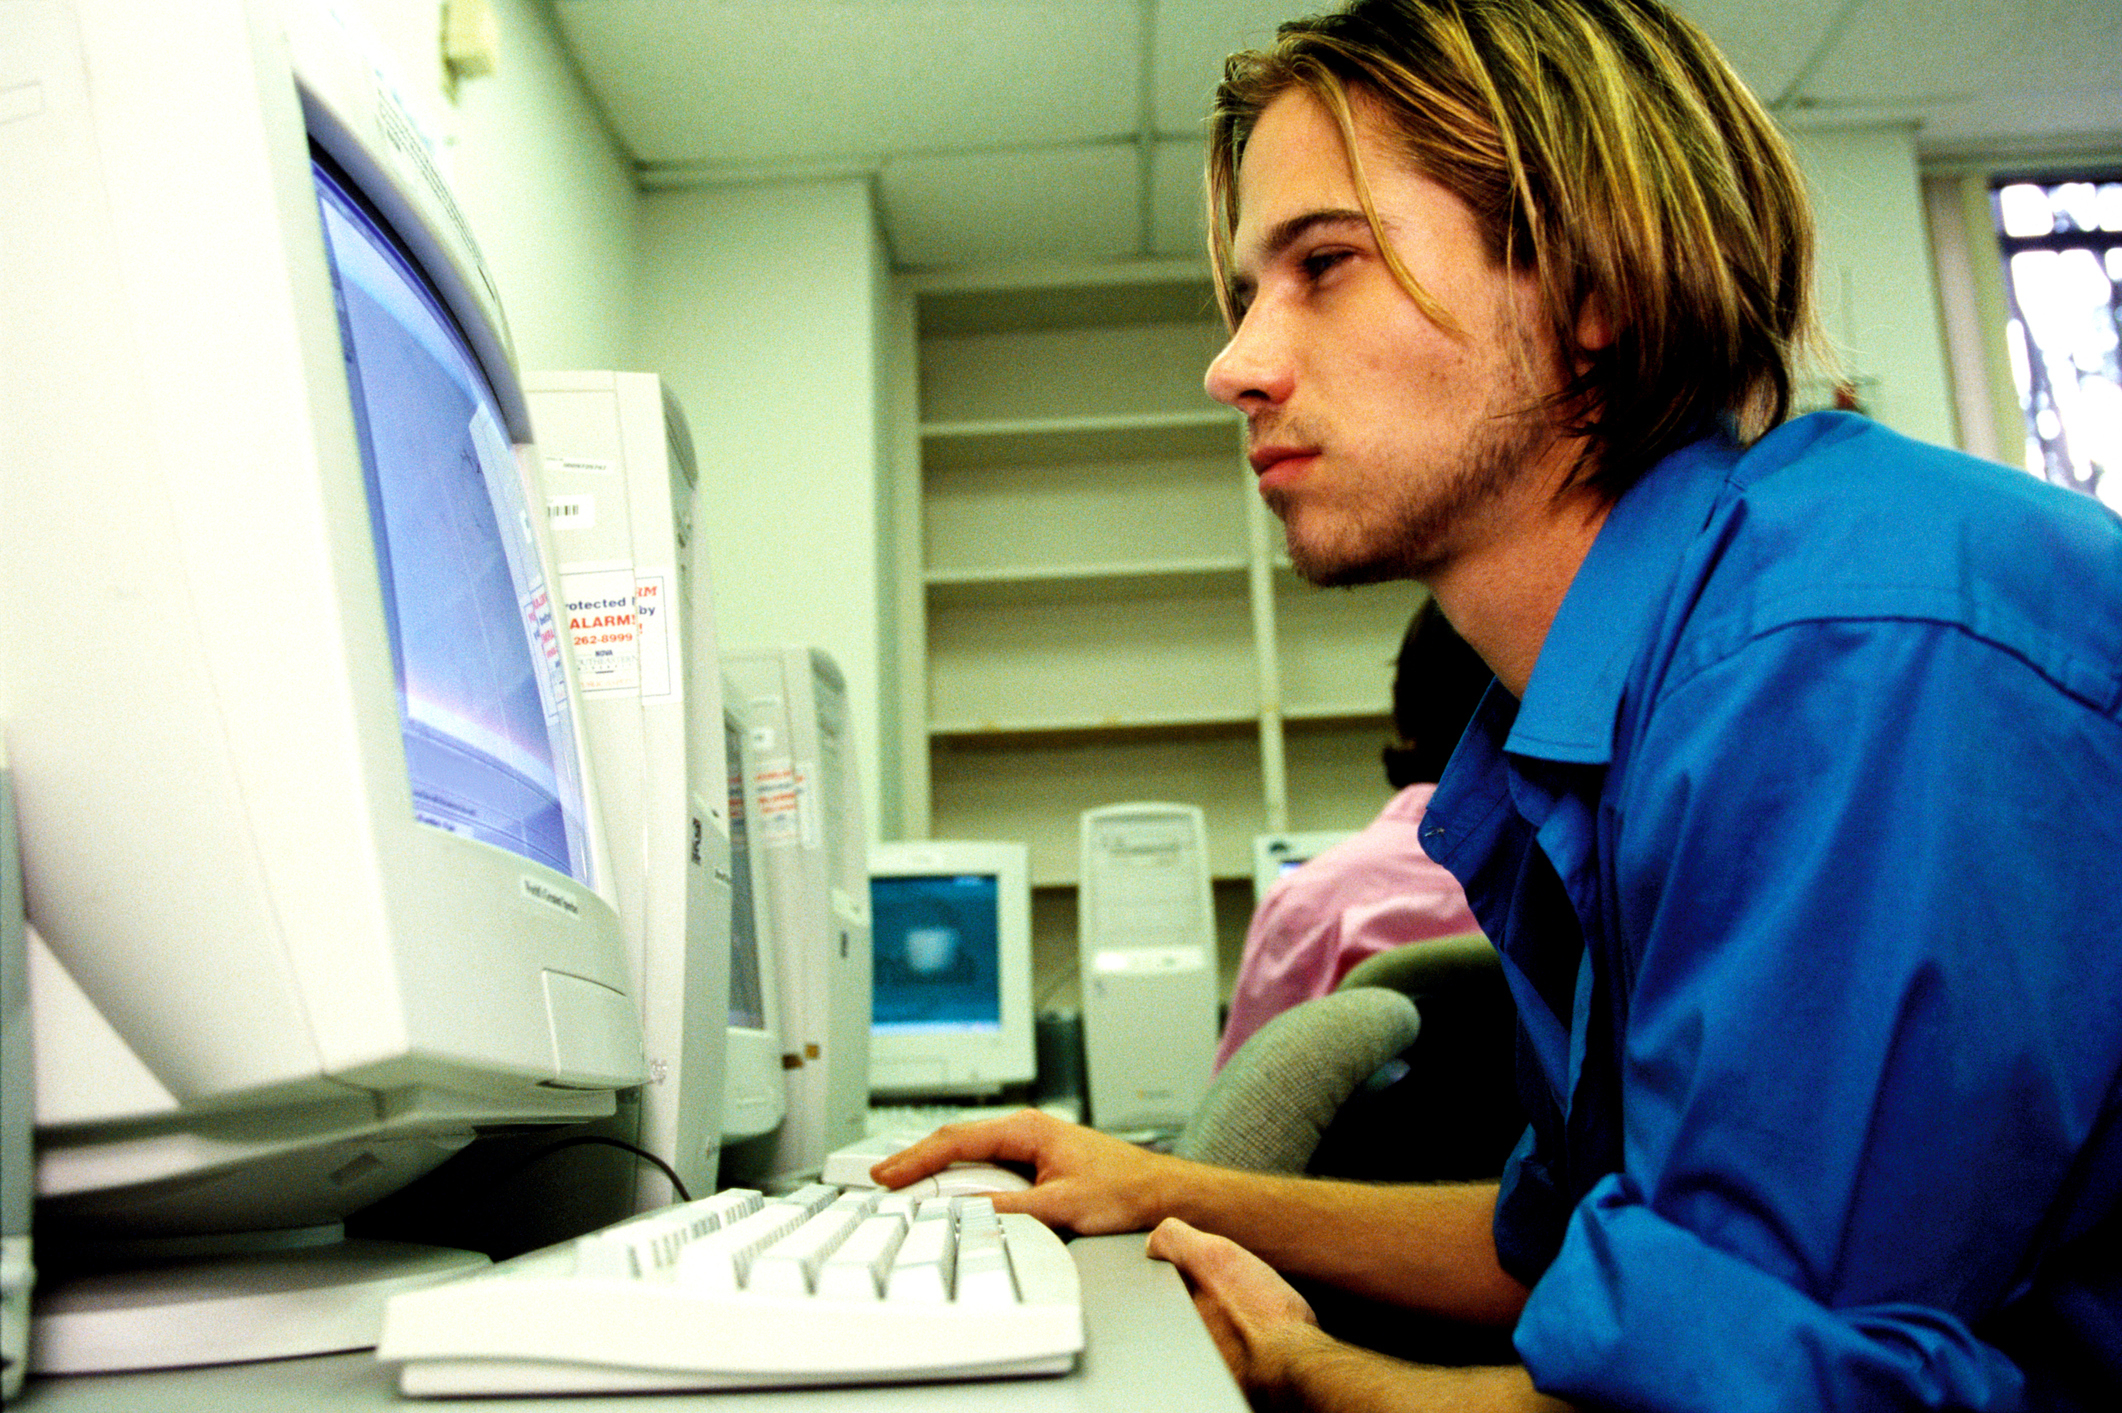 Person focused on computer screen in a work environment